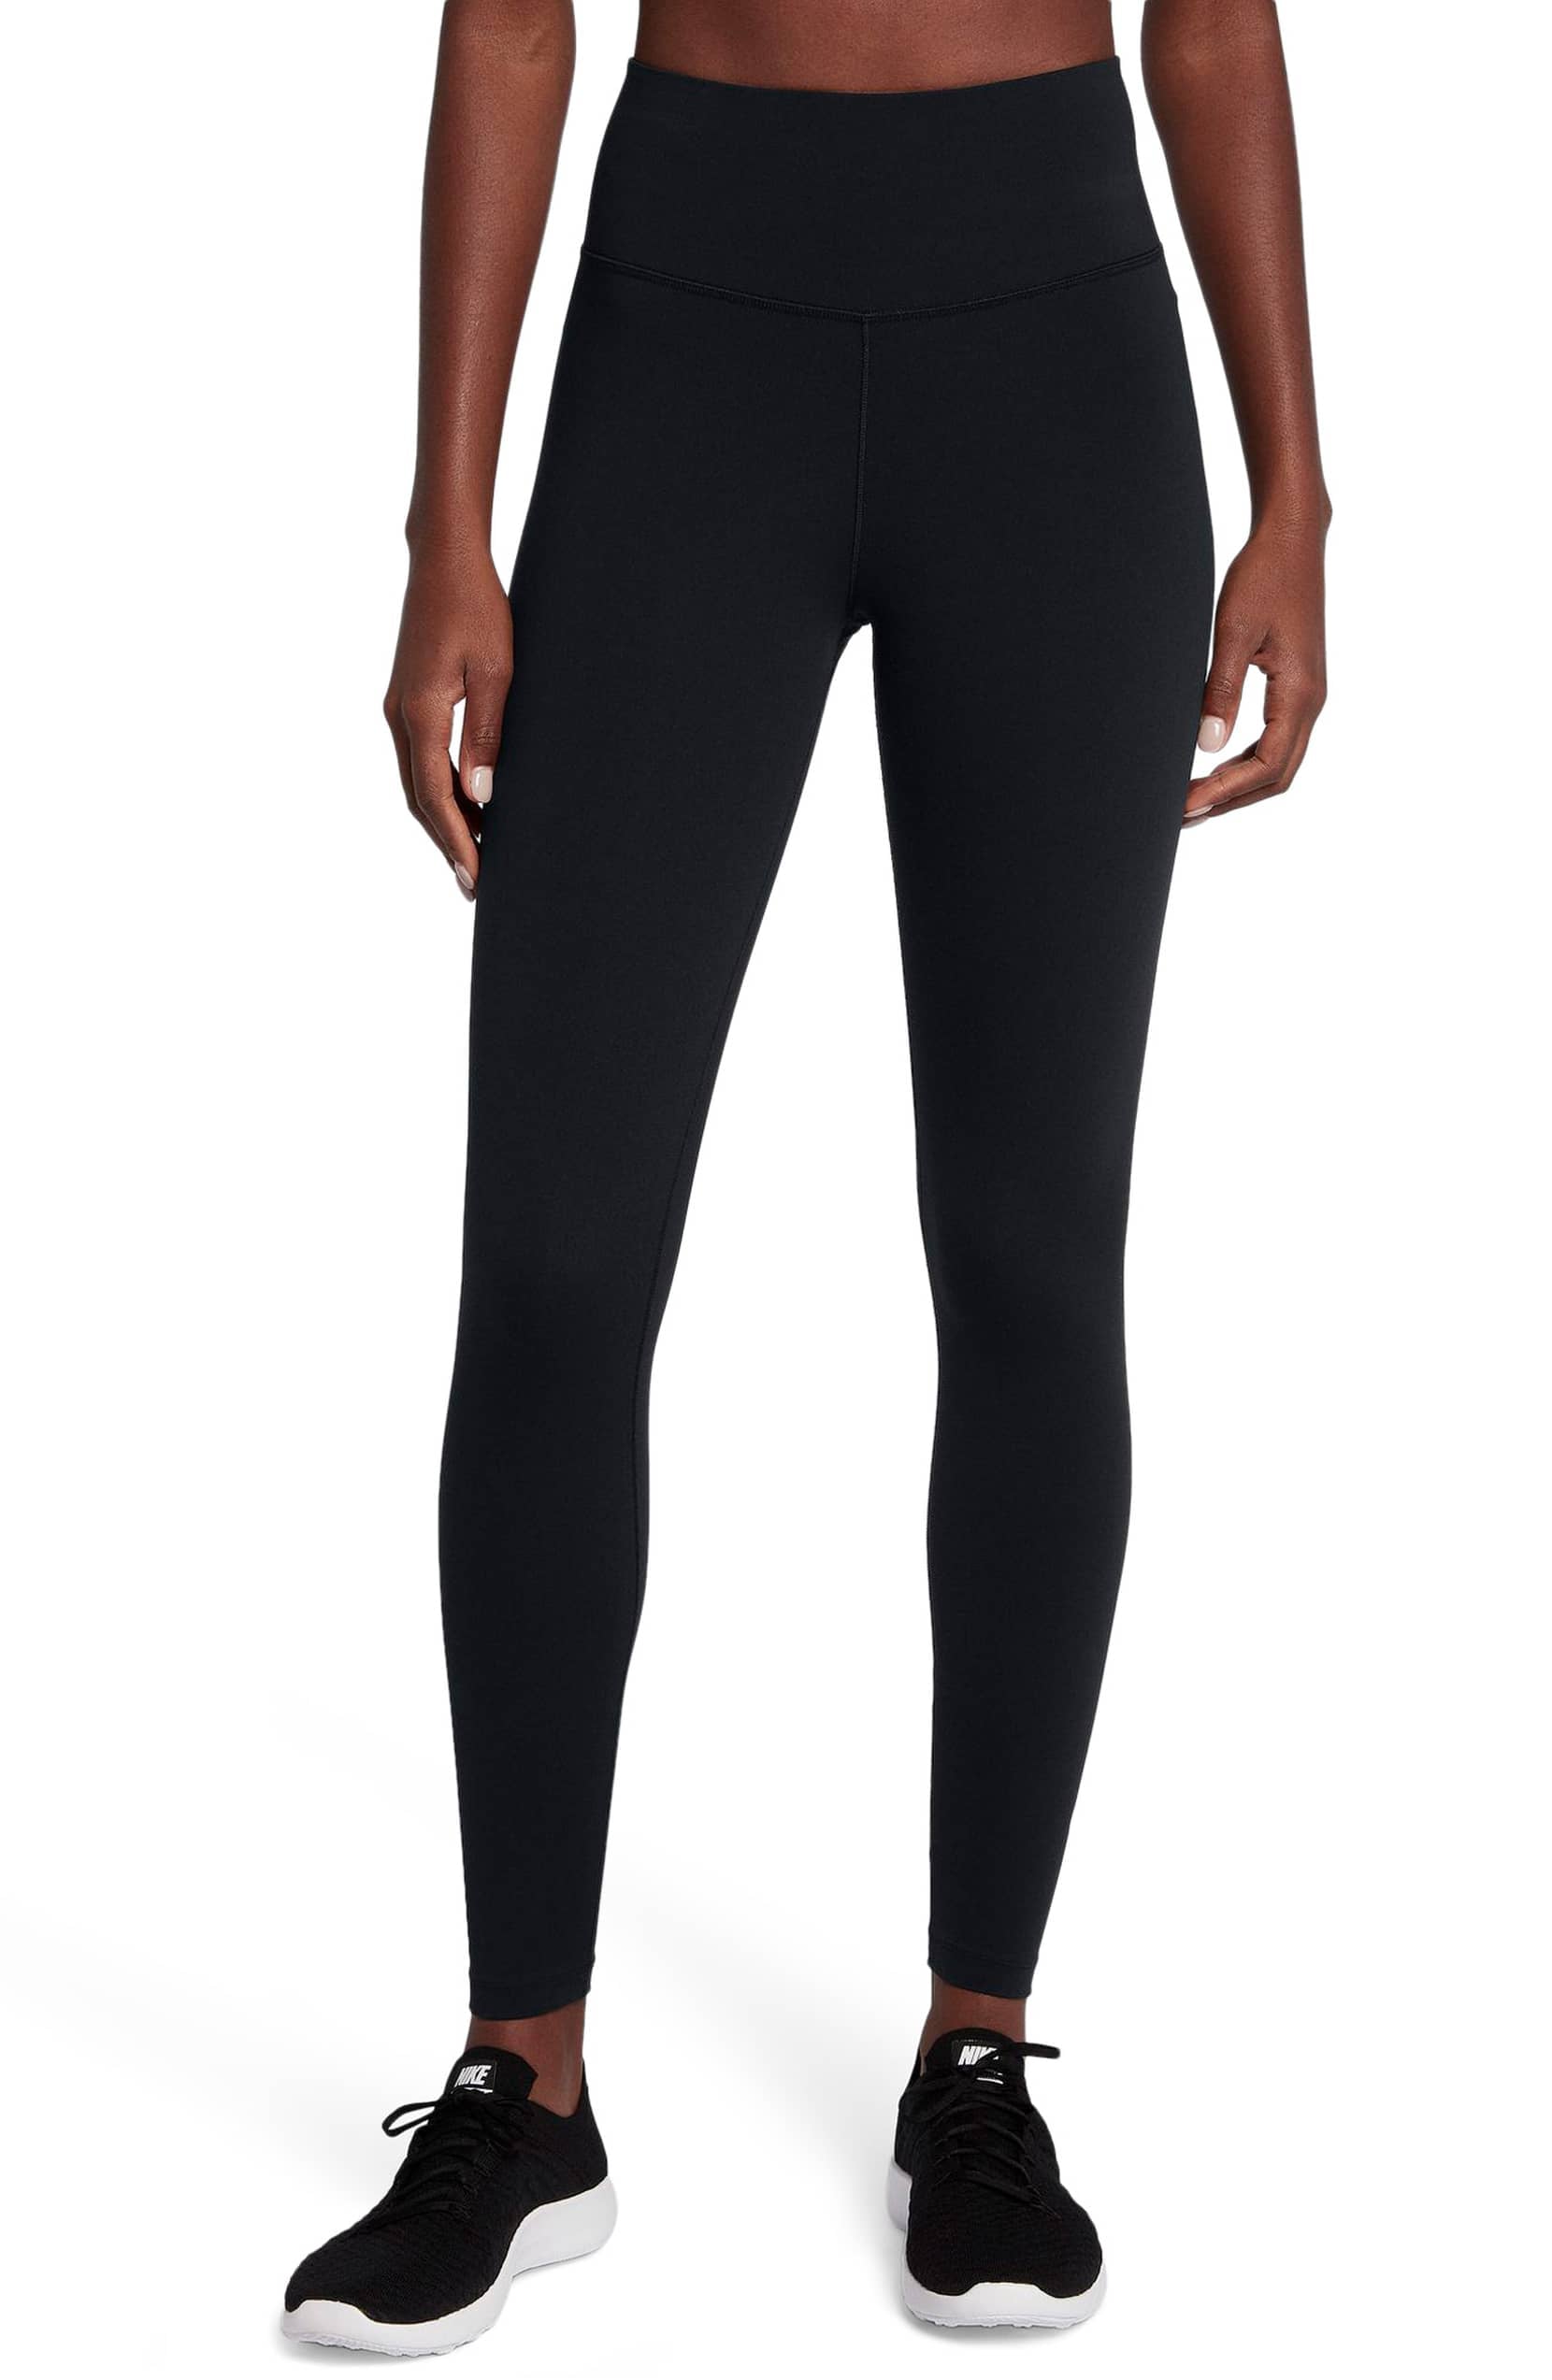 Nike Sculpt Lux Training Tights | Fall Should Renamed "Running Season" Thanks All These Cute Clothes | POPSUGAR Fitness Photo 17